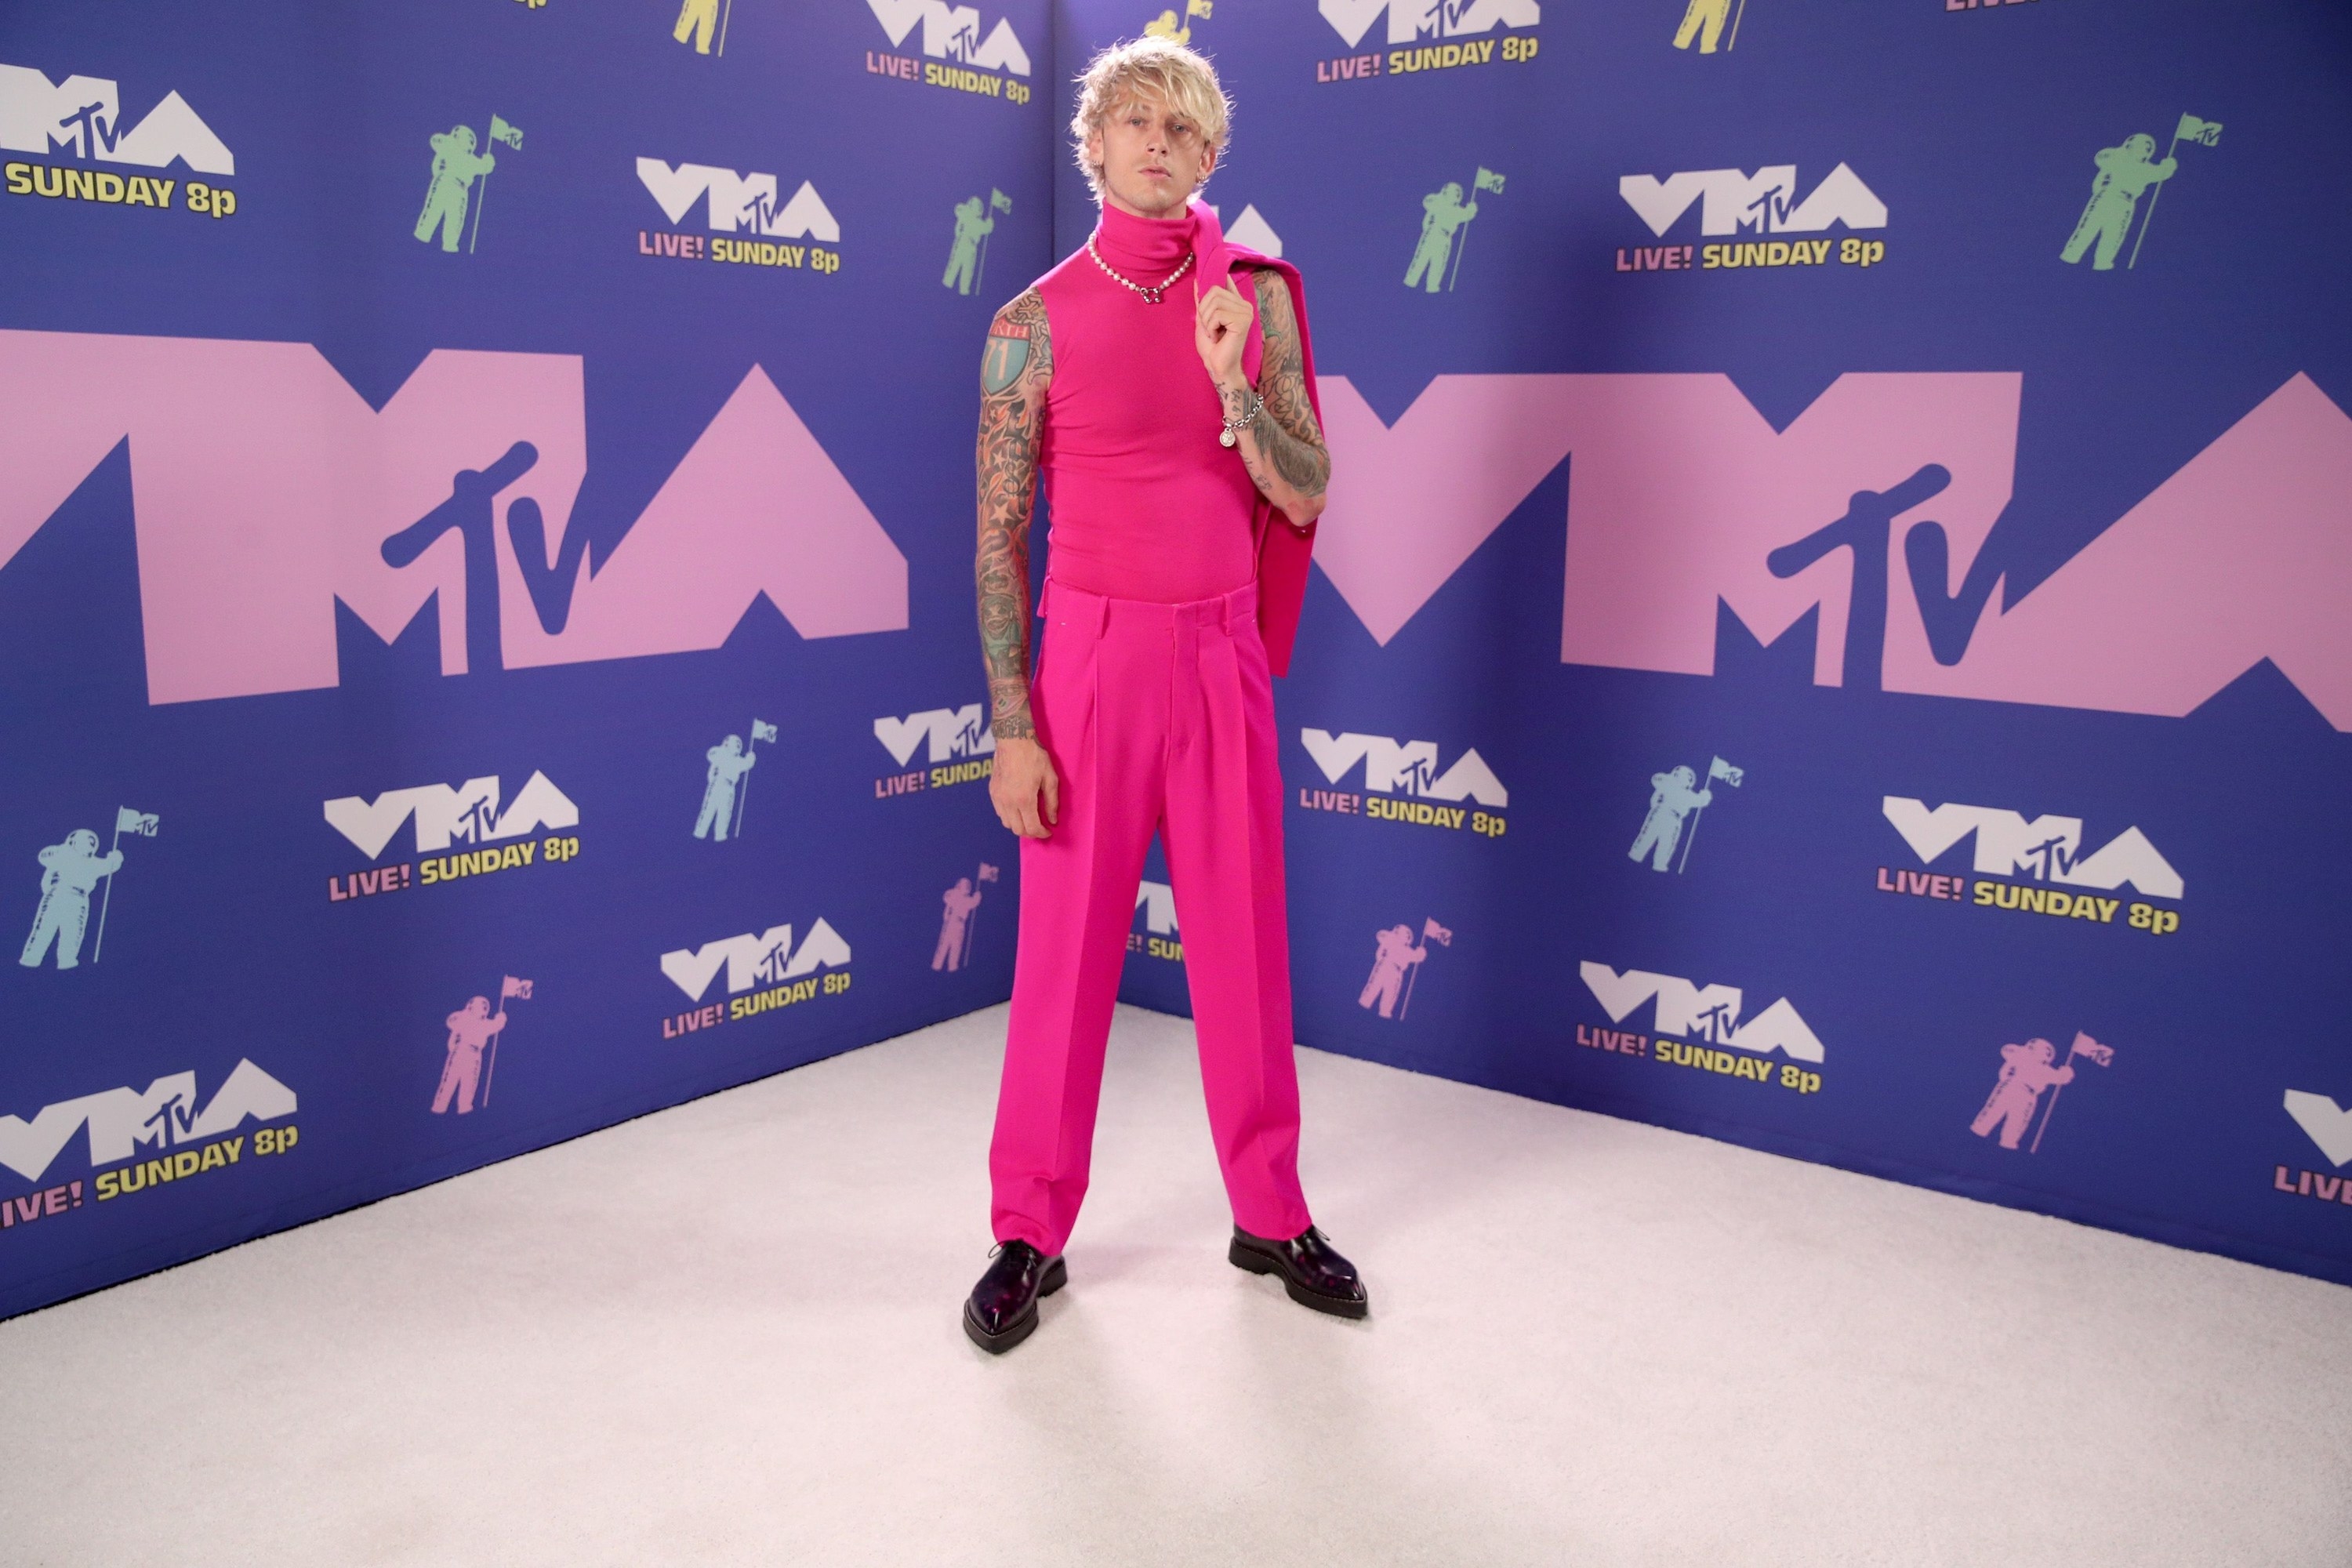  Machine Gun Kelly poses with the Best Alternative Award for &quot;Bloody Valentine&quot; during the 2020 MTV Video Music Awards, broadcast on Sunday, August 30th 2020